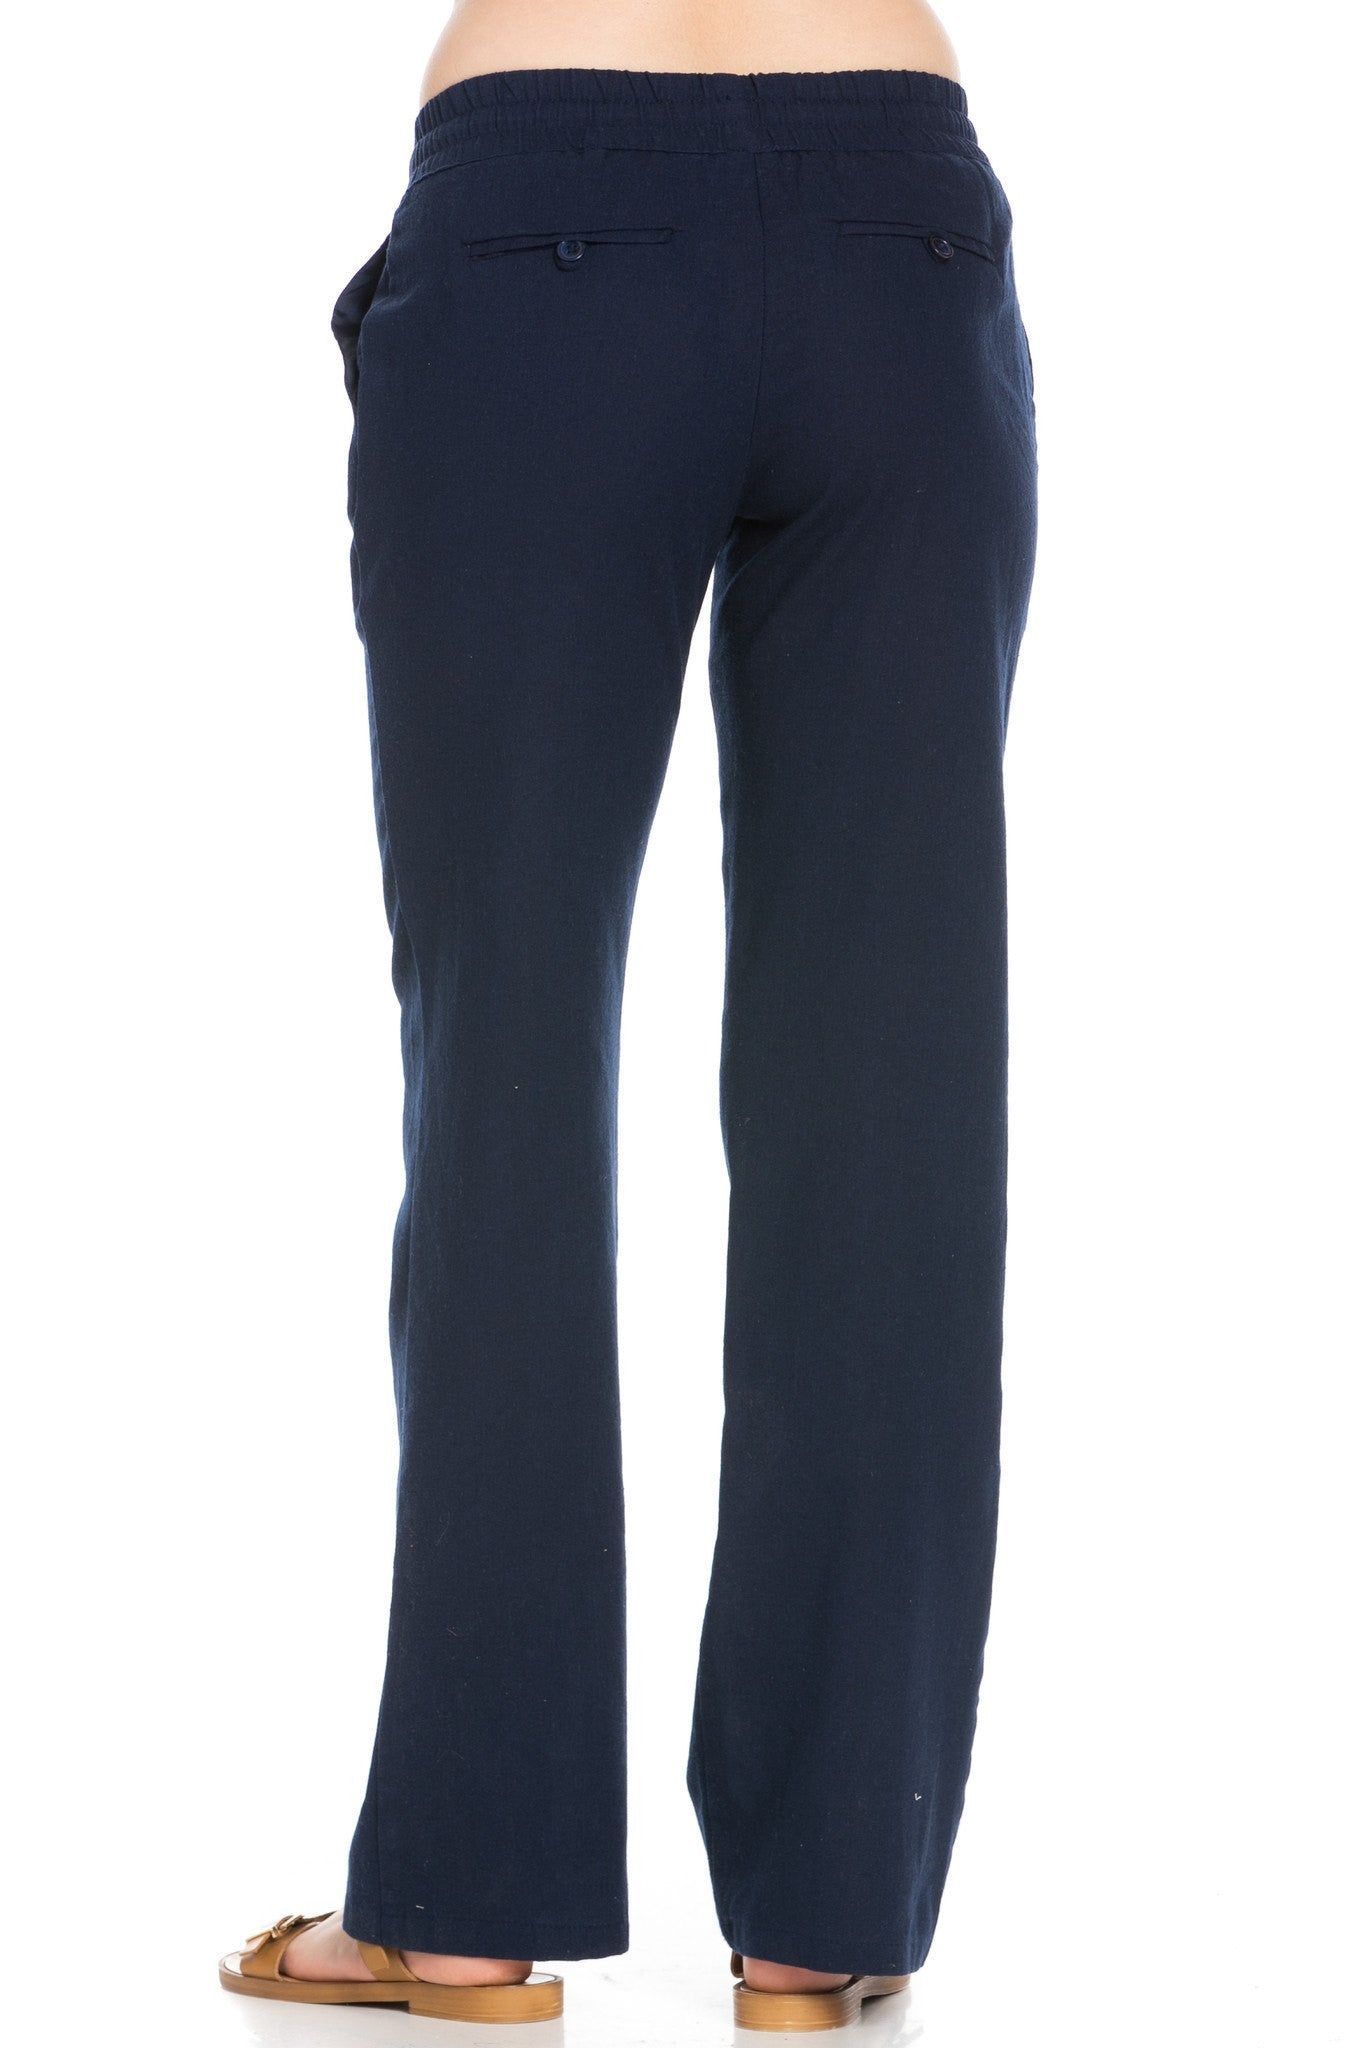 Comfy Drawstring Linen Pants Long with Band Waist (Navy) - Poplooks